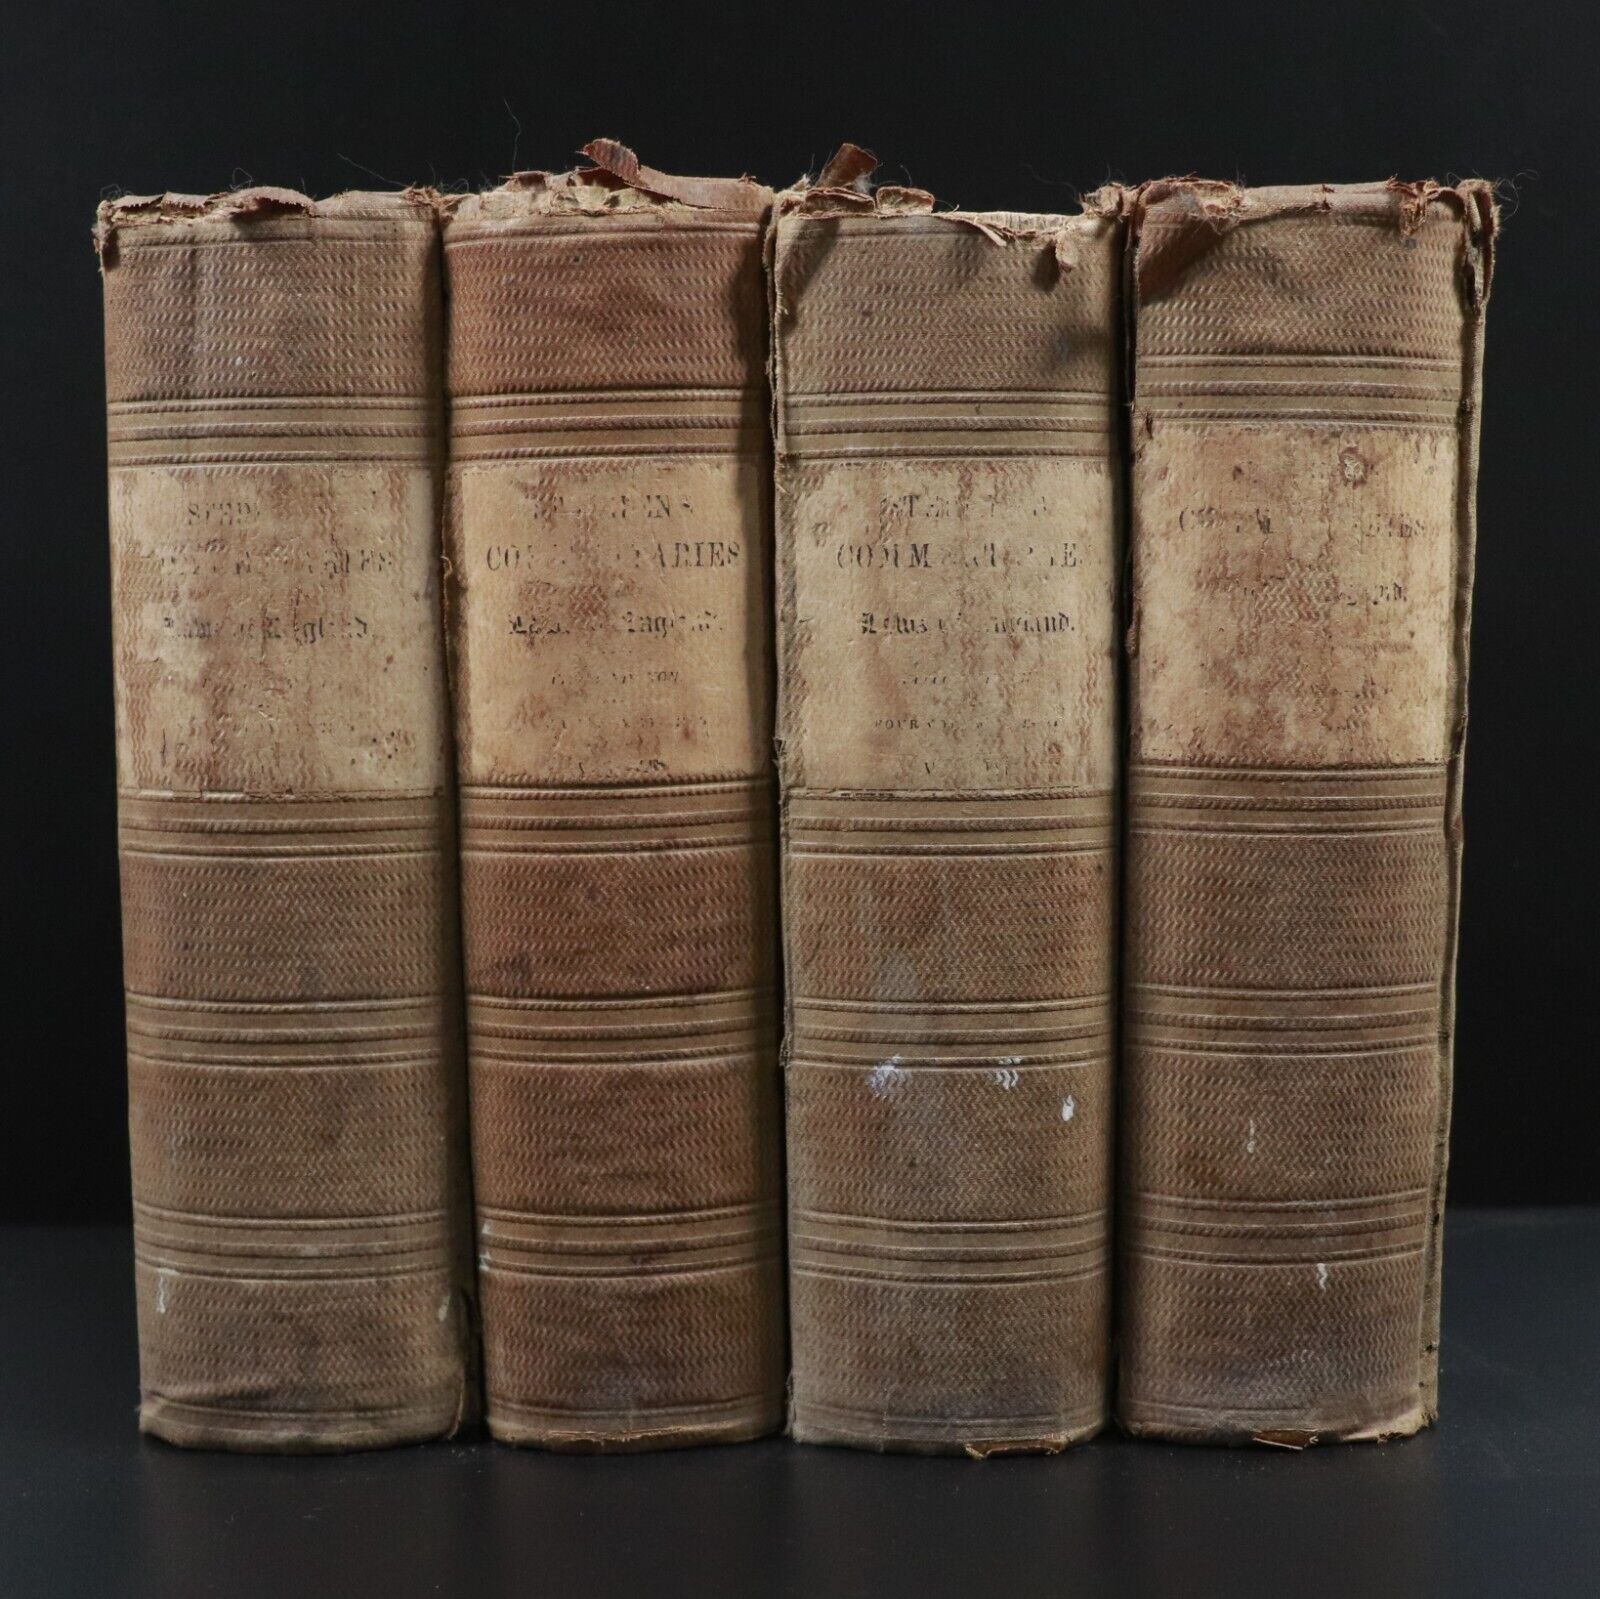 1863 4vol Commentaries On The Laws Of England Antiquarian British Legal Book Set